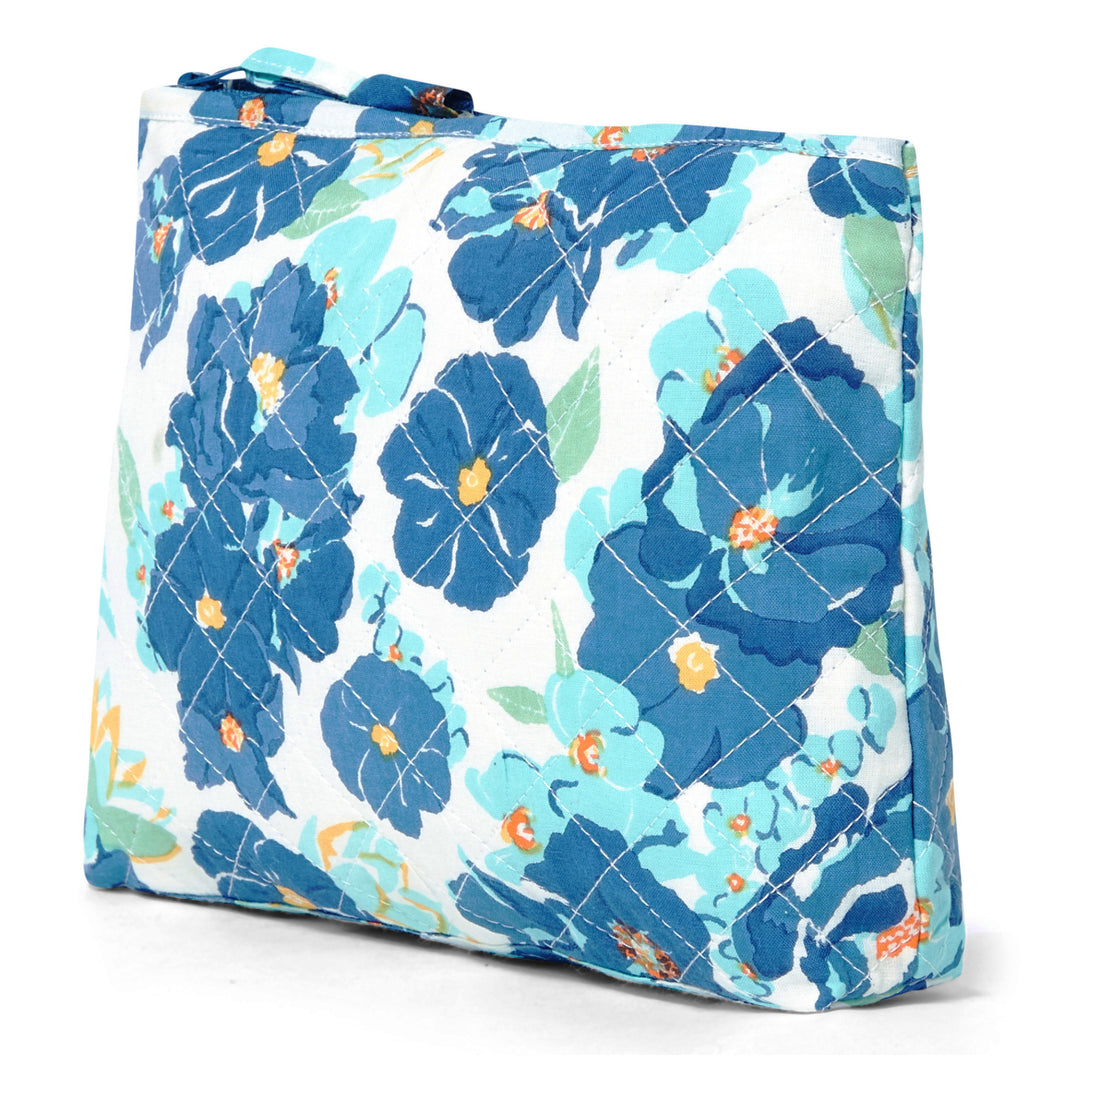 Quilted Toiletry Bag - Parkette.